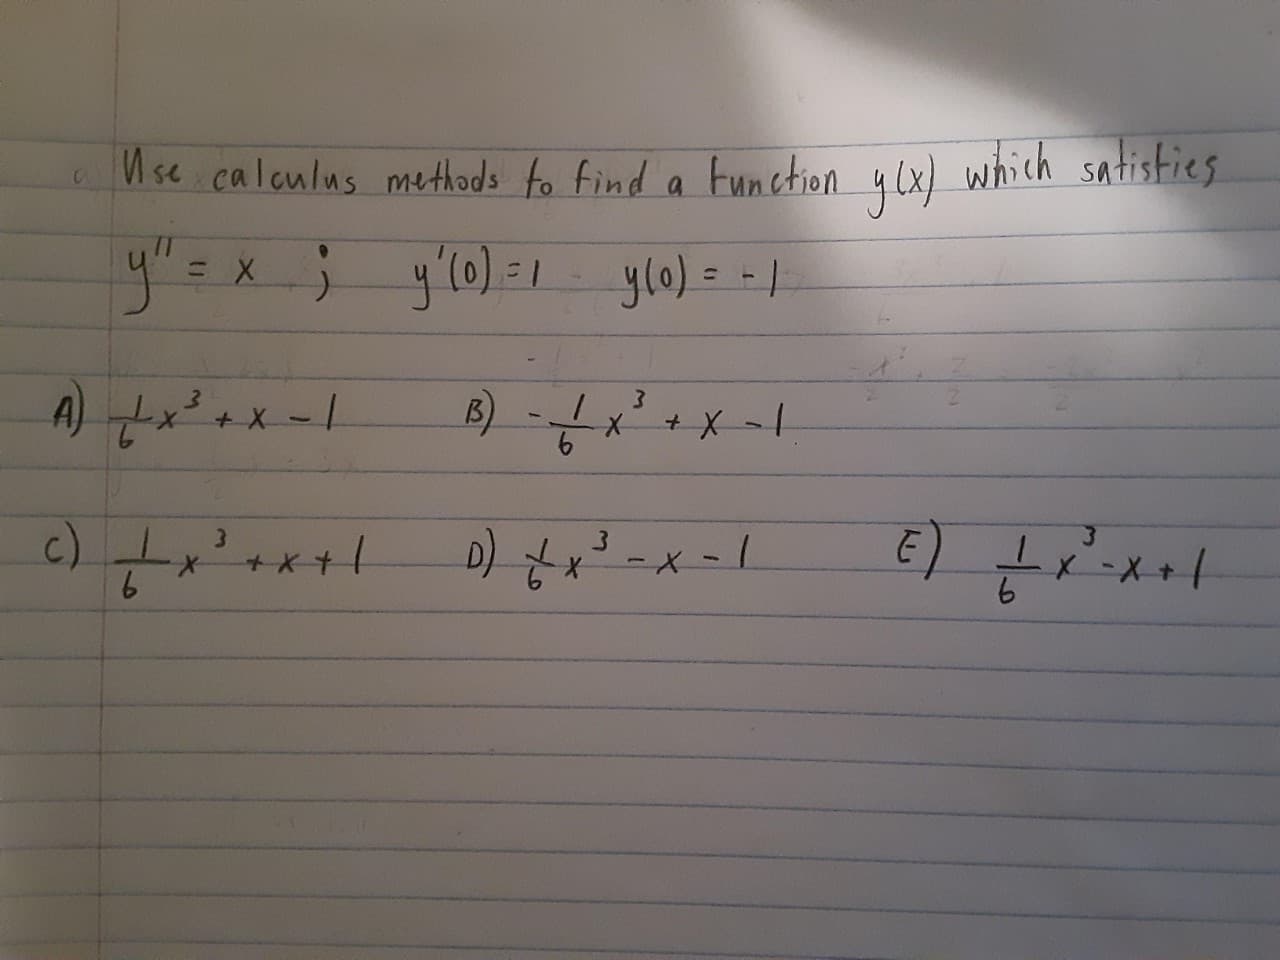 which satisties
Function
M se calculus methods to find a
=x; y'l0)=1
ylo)= =/
%3D
A) x+x -1
B) --
3.
D) *
+*+1
6.
